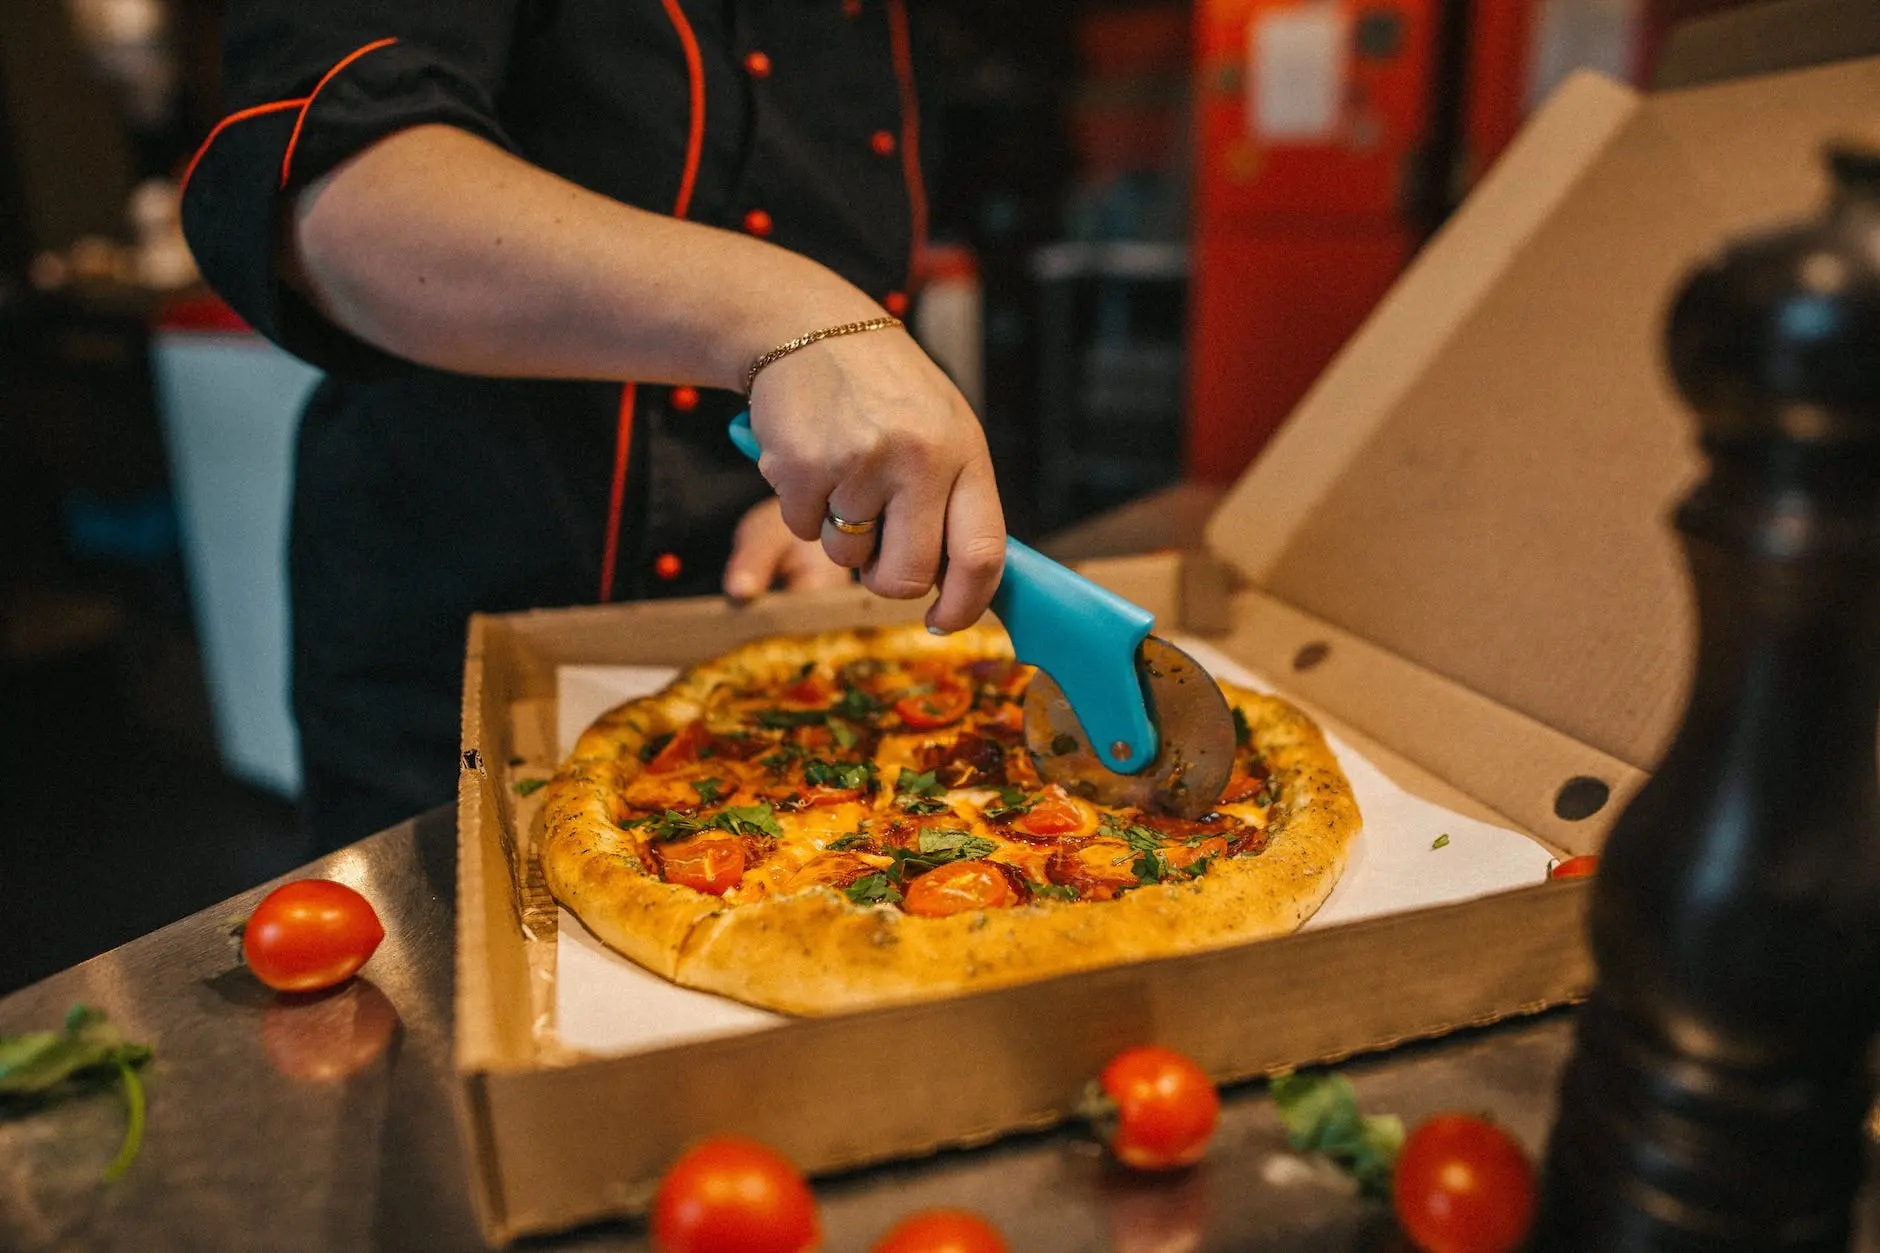 person cutting pizza with a pizza cutter